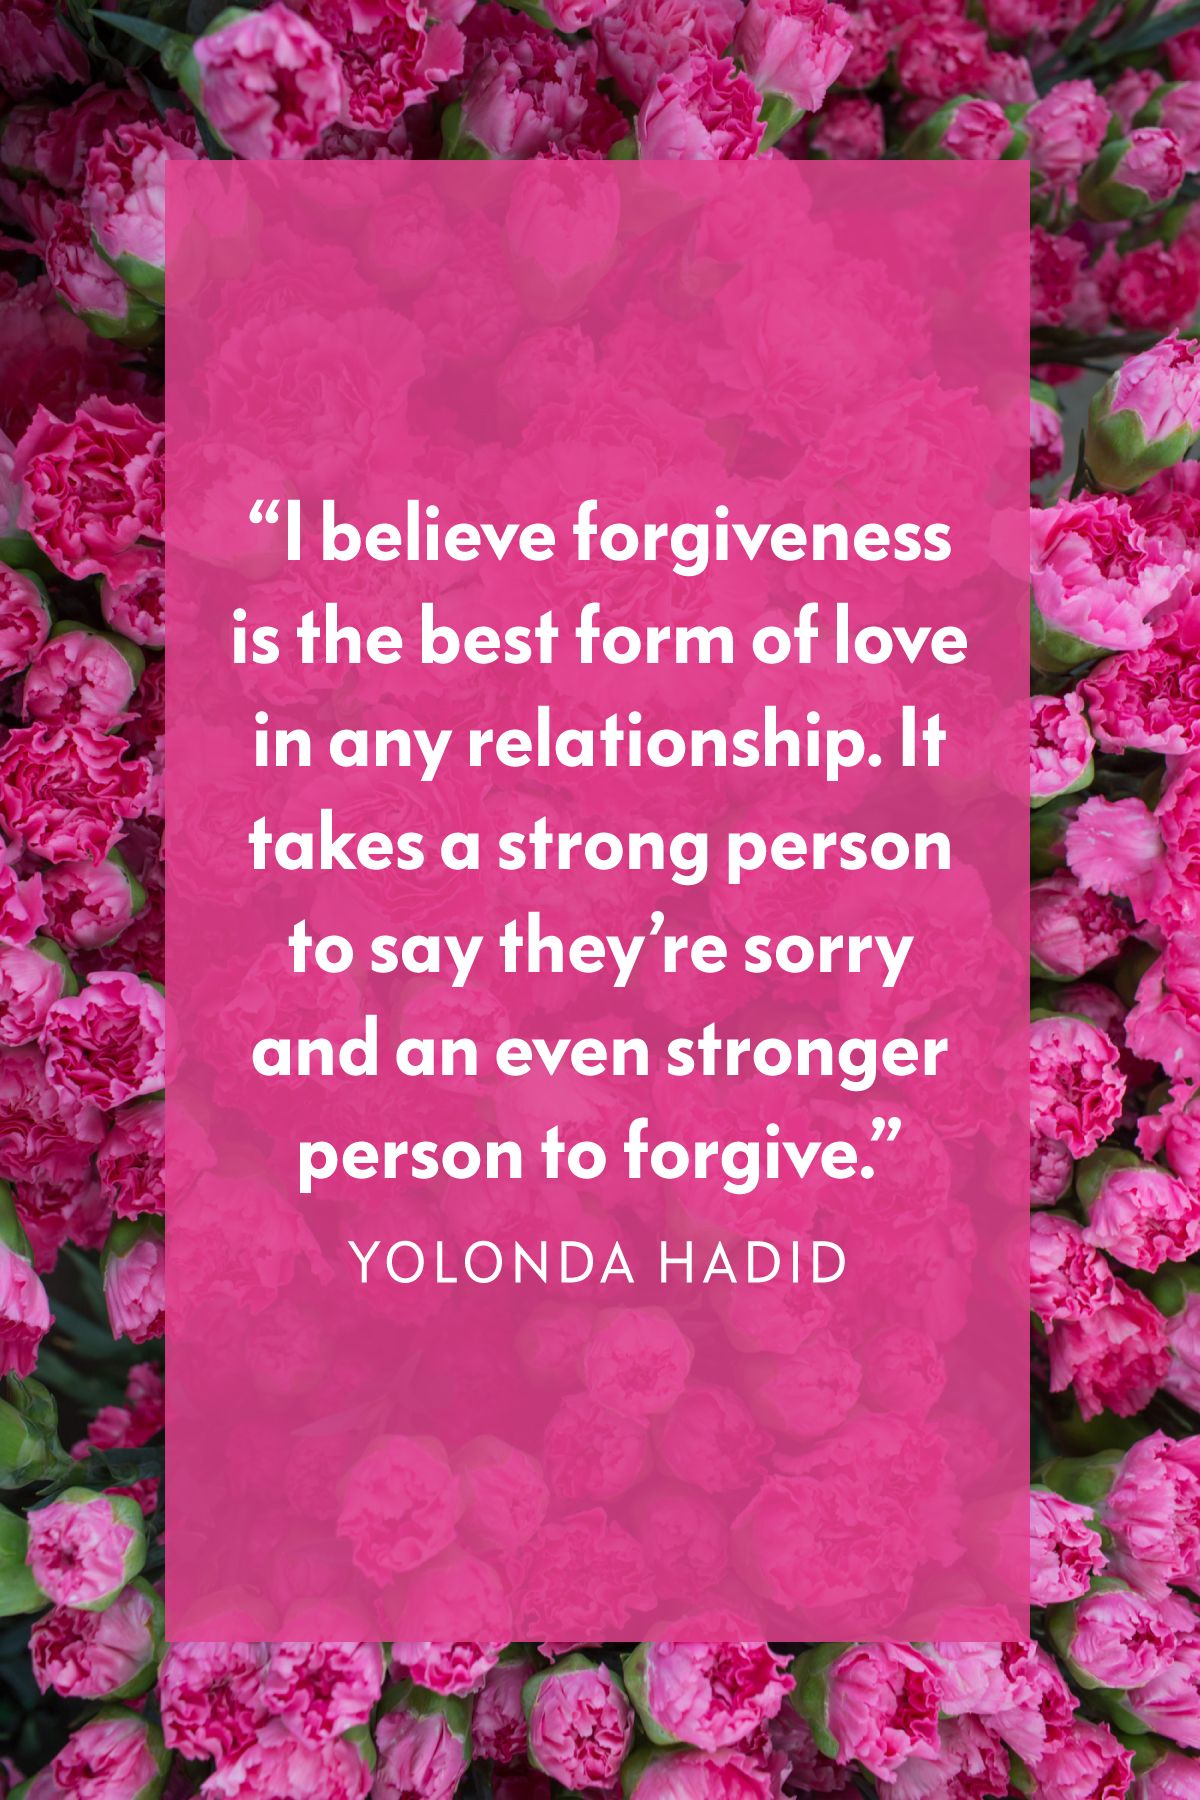 12 Forgiveness Quotes That'll Help You Move On